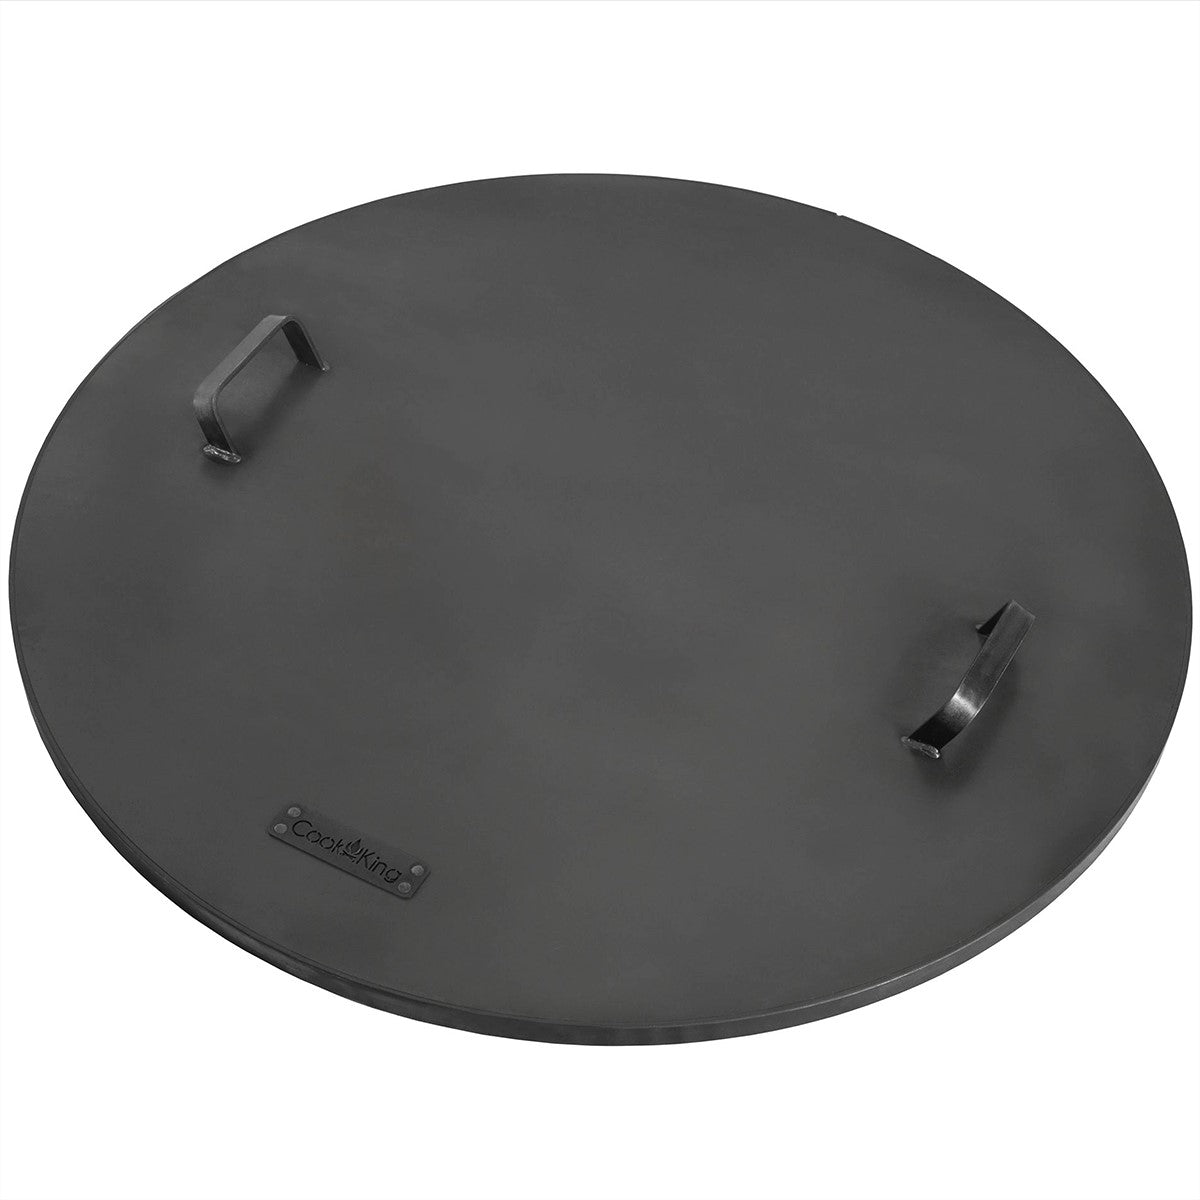 Fire Pit Round Cover Lid, 2mm Thickness, Fire Snuffer in Powder Coated Finish Rust Resistant, Drop-in Burner Fire Pit Pan Lid, Grill Fire Ring Lid with Handle, 24” inch Diameter - Good Directions